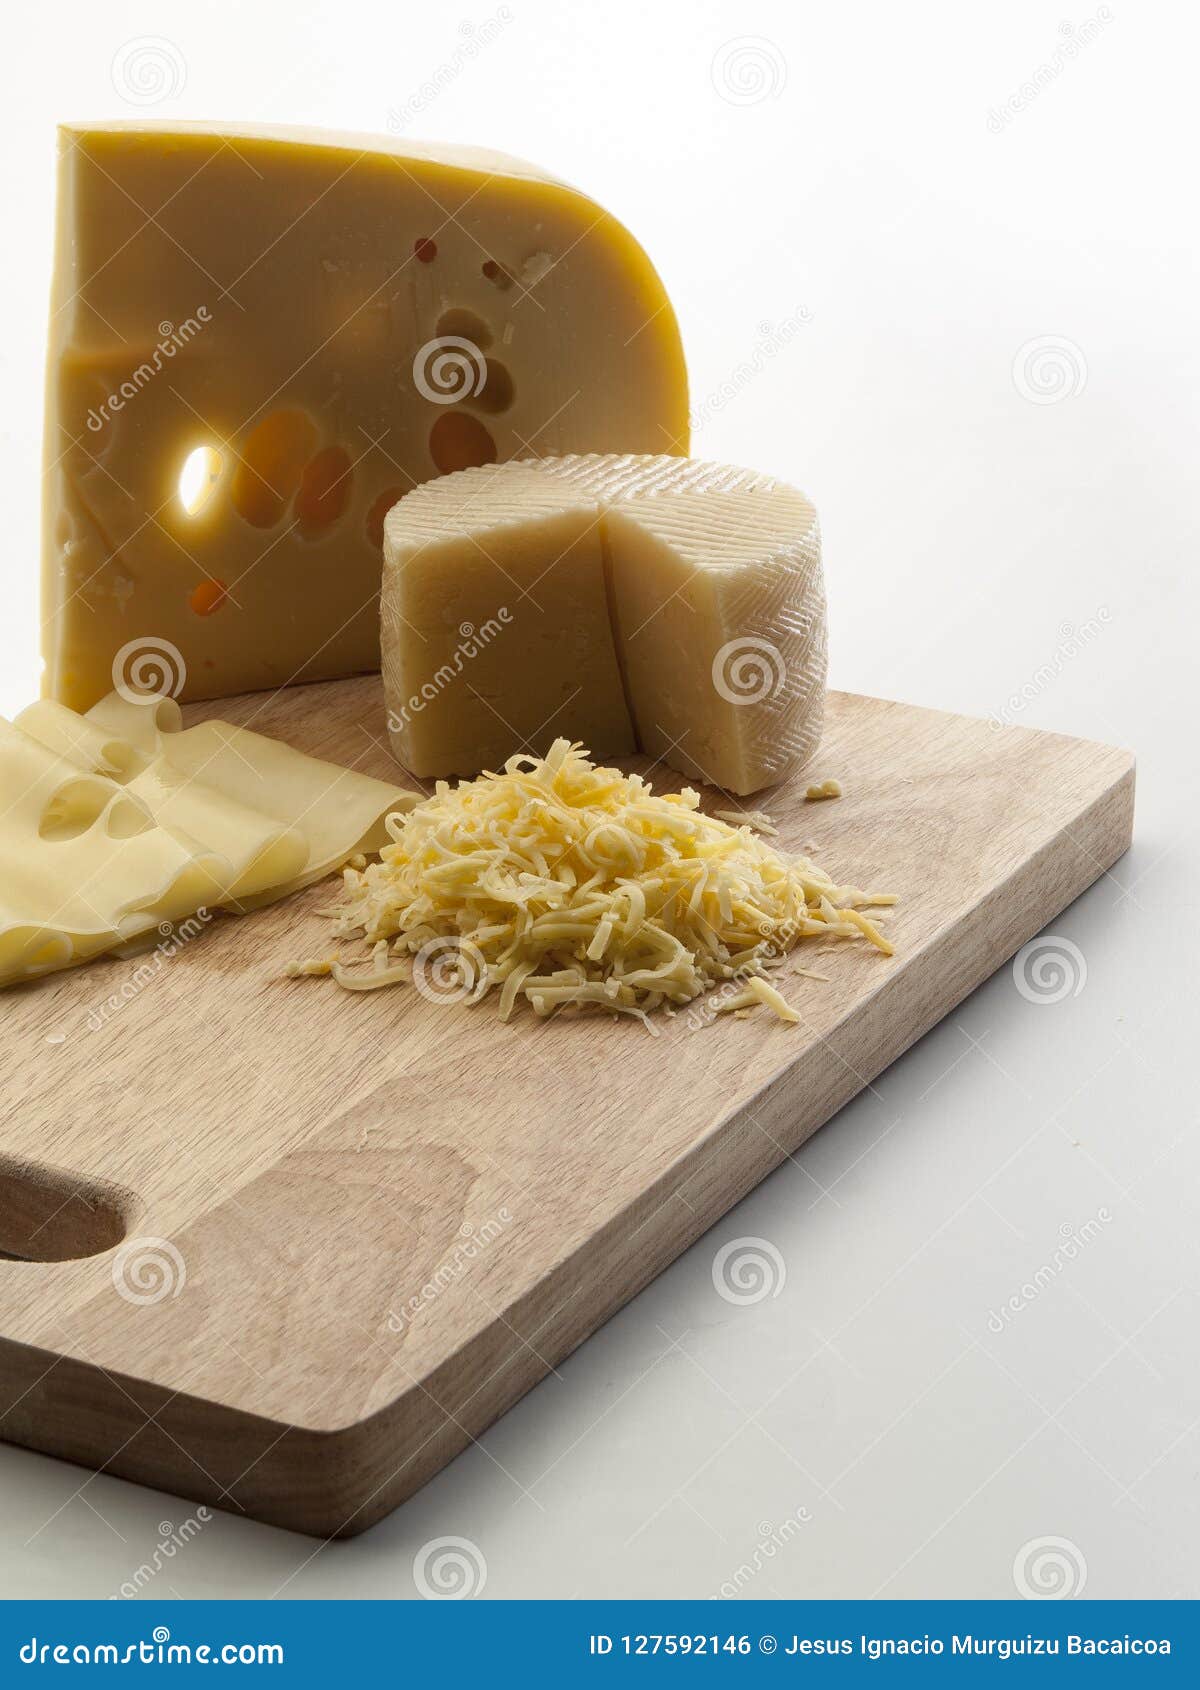 photographic still life with sheep cheeses and to melt with slices and scratches of it on a cutting board